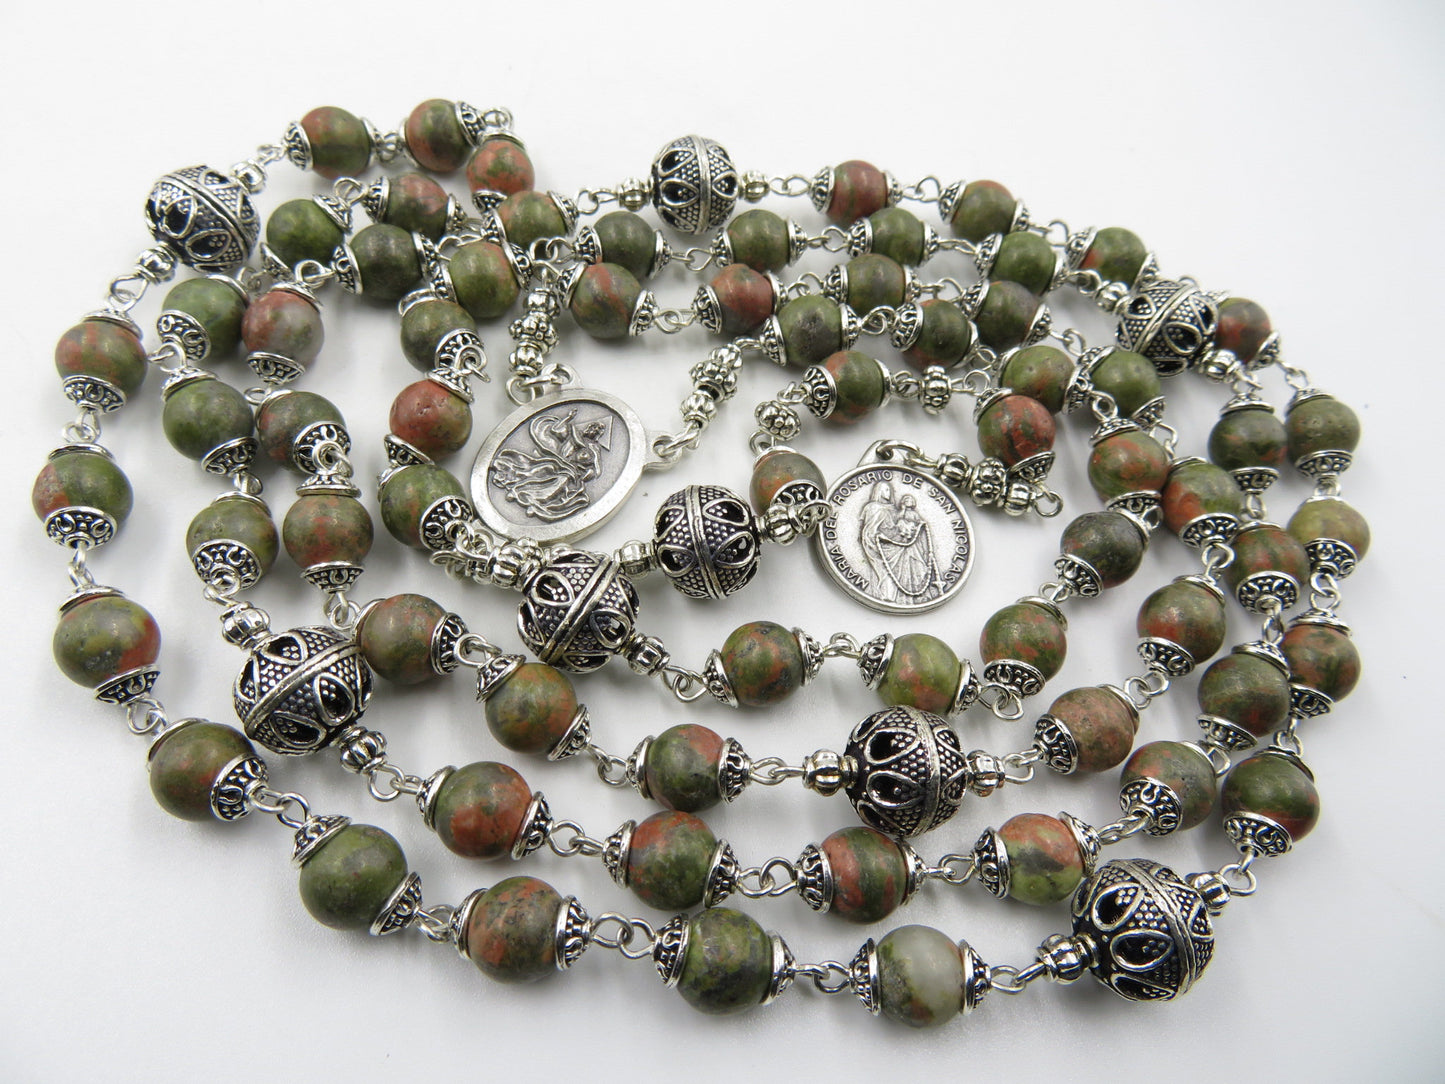 Large God The Father Chaplet Heirloom Gemstone Rosary beads, Our Lady of the Rosary medal, Gemstone Heirloom Rosaries, Men's Prayer Chaplet.